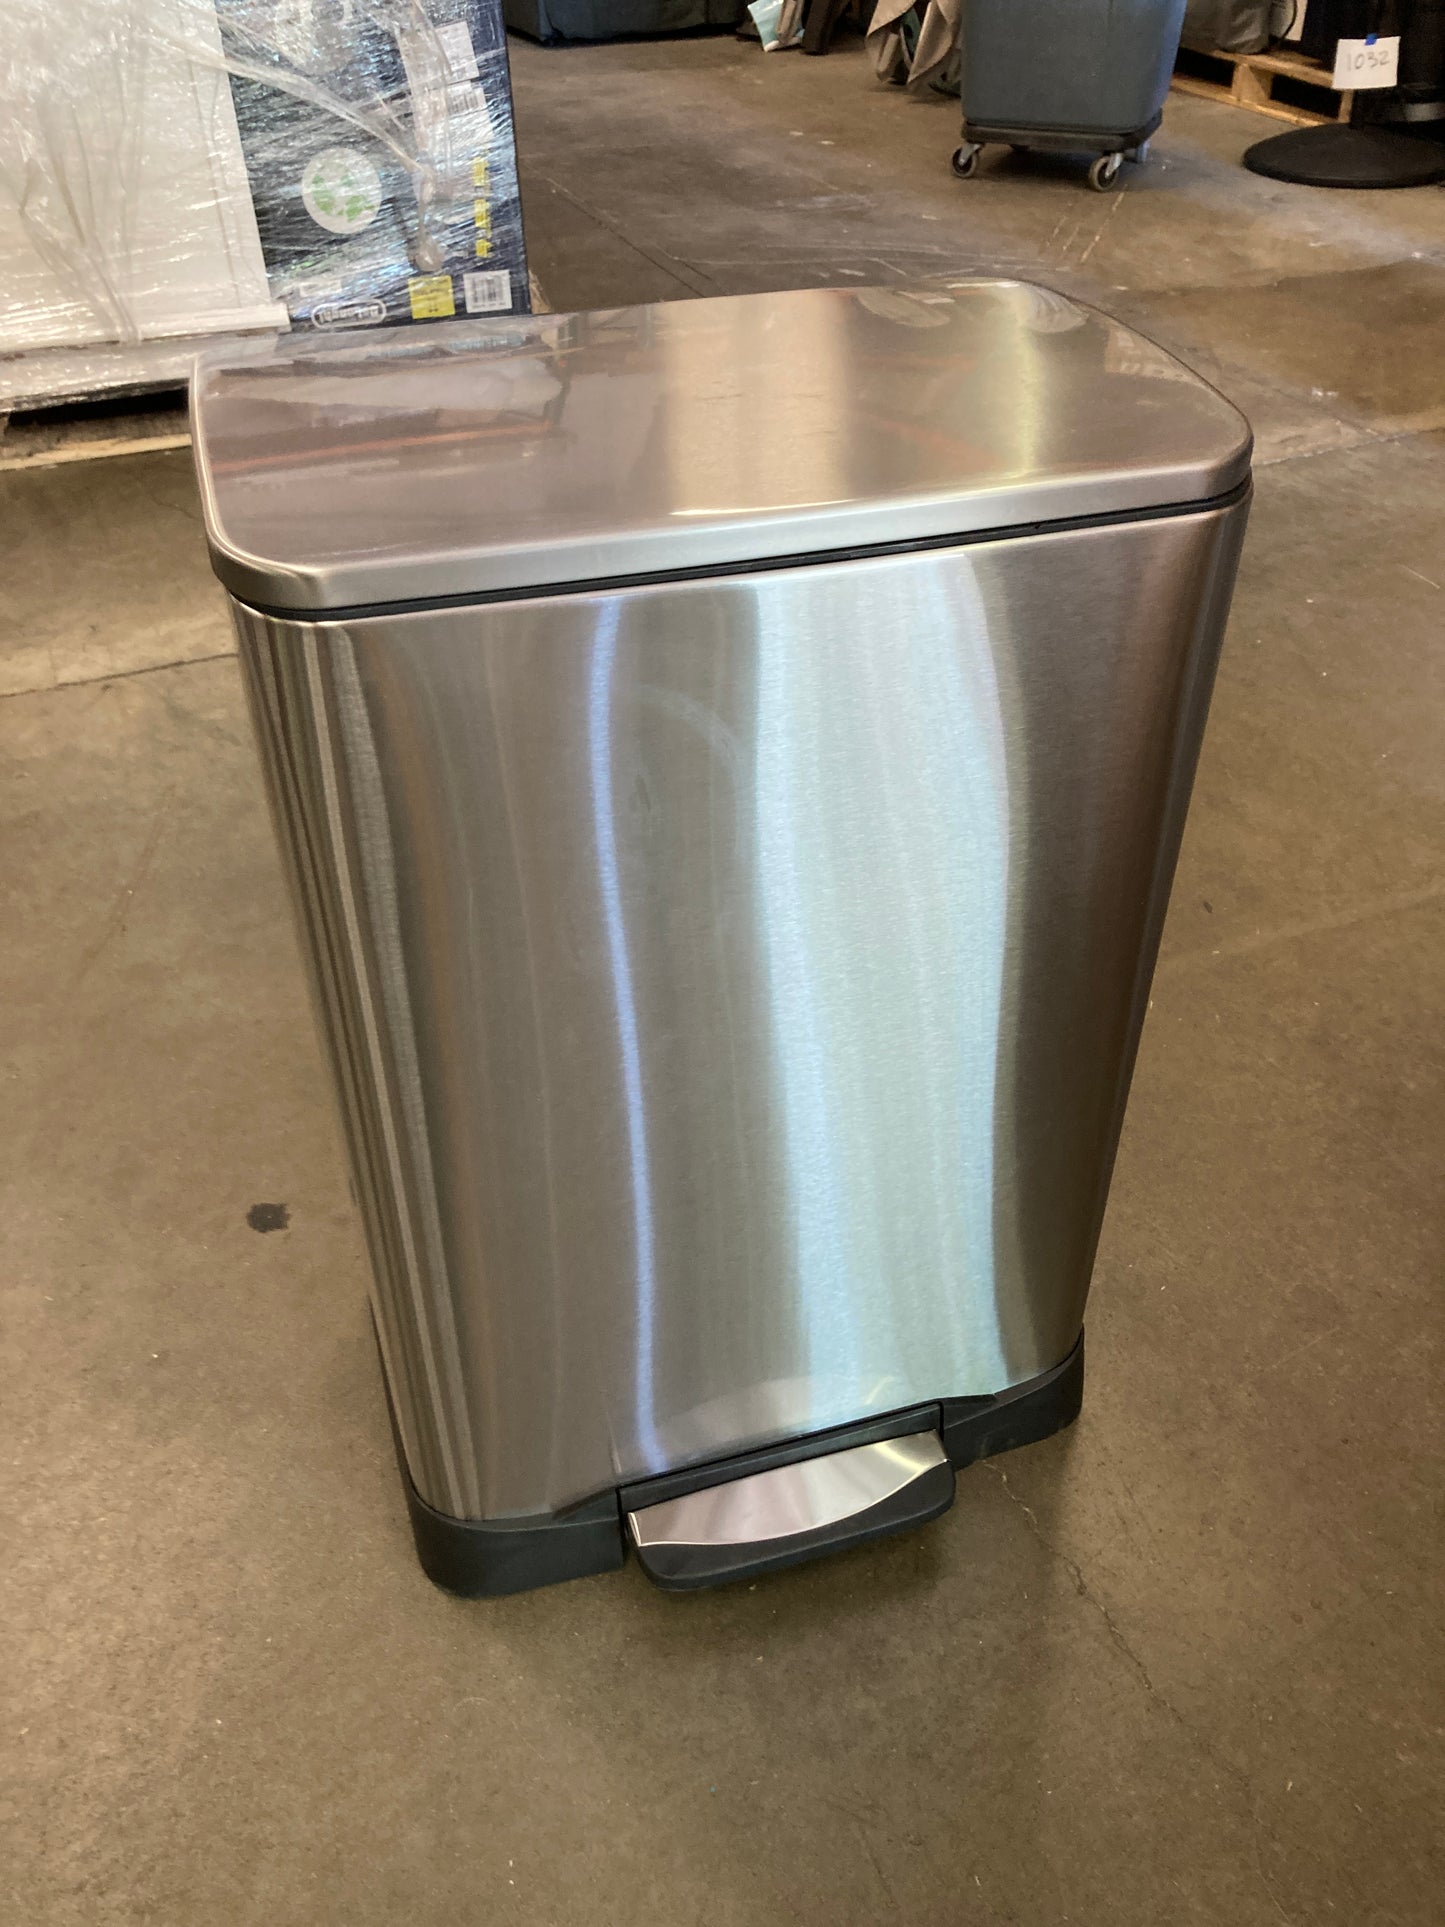 Costco - Neocube 50 Liter Stainless Steel Trash Can - Retail $99